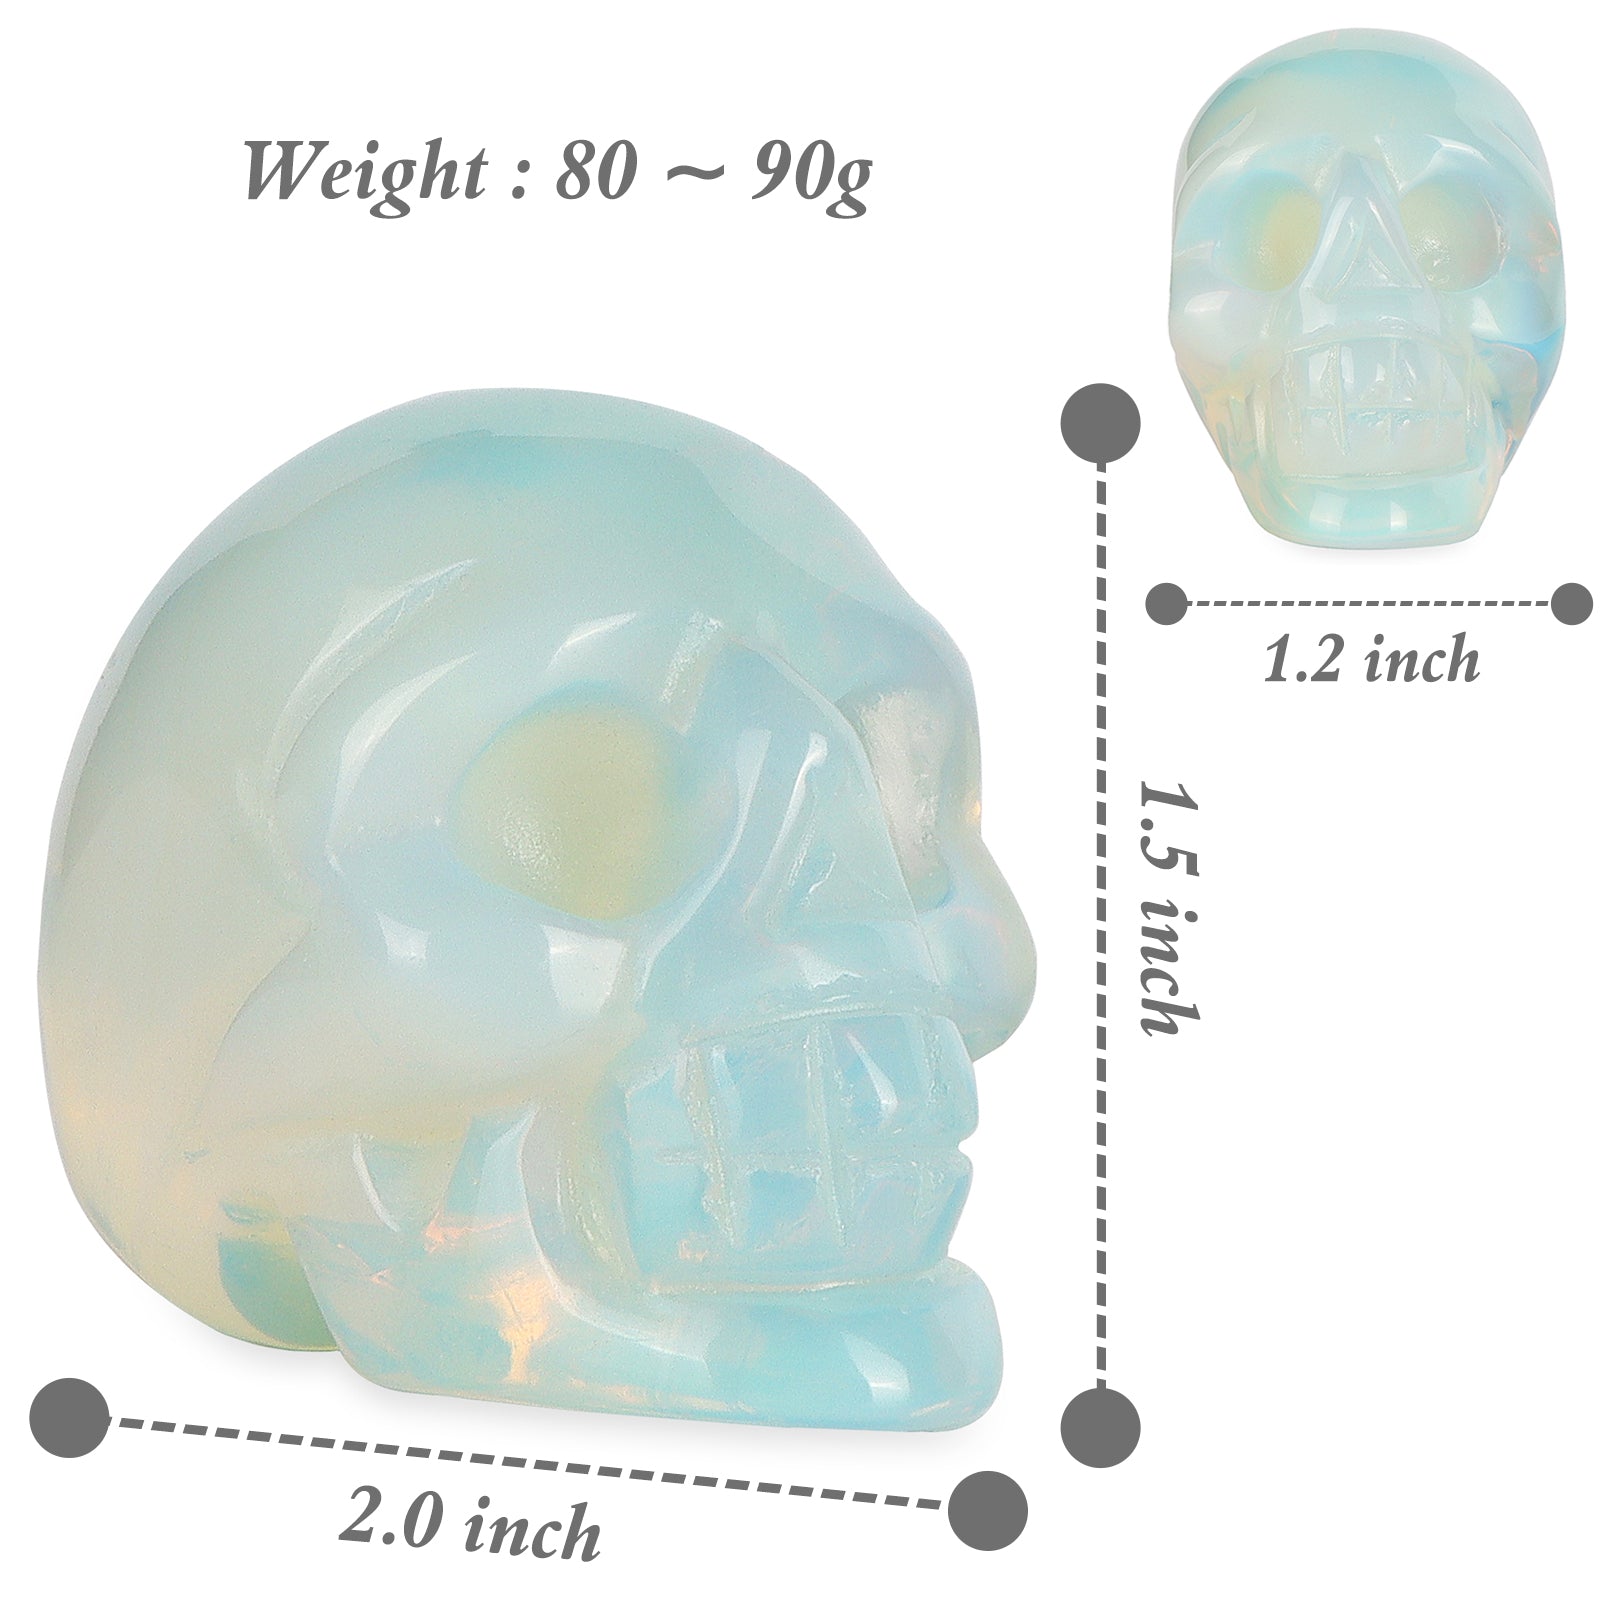 2.0" Opalite Crystal Skull Head Decor Statue Crystals and Healing Stones Aoxily CHN, Inc. All Rights Reserved.